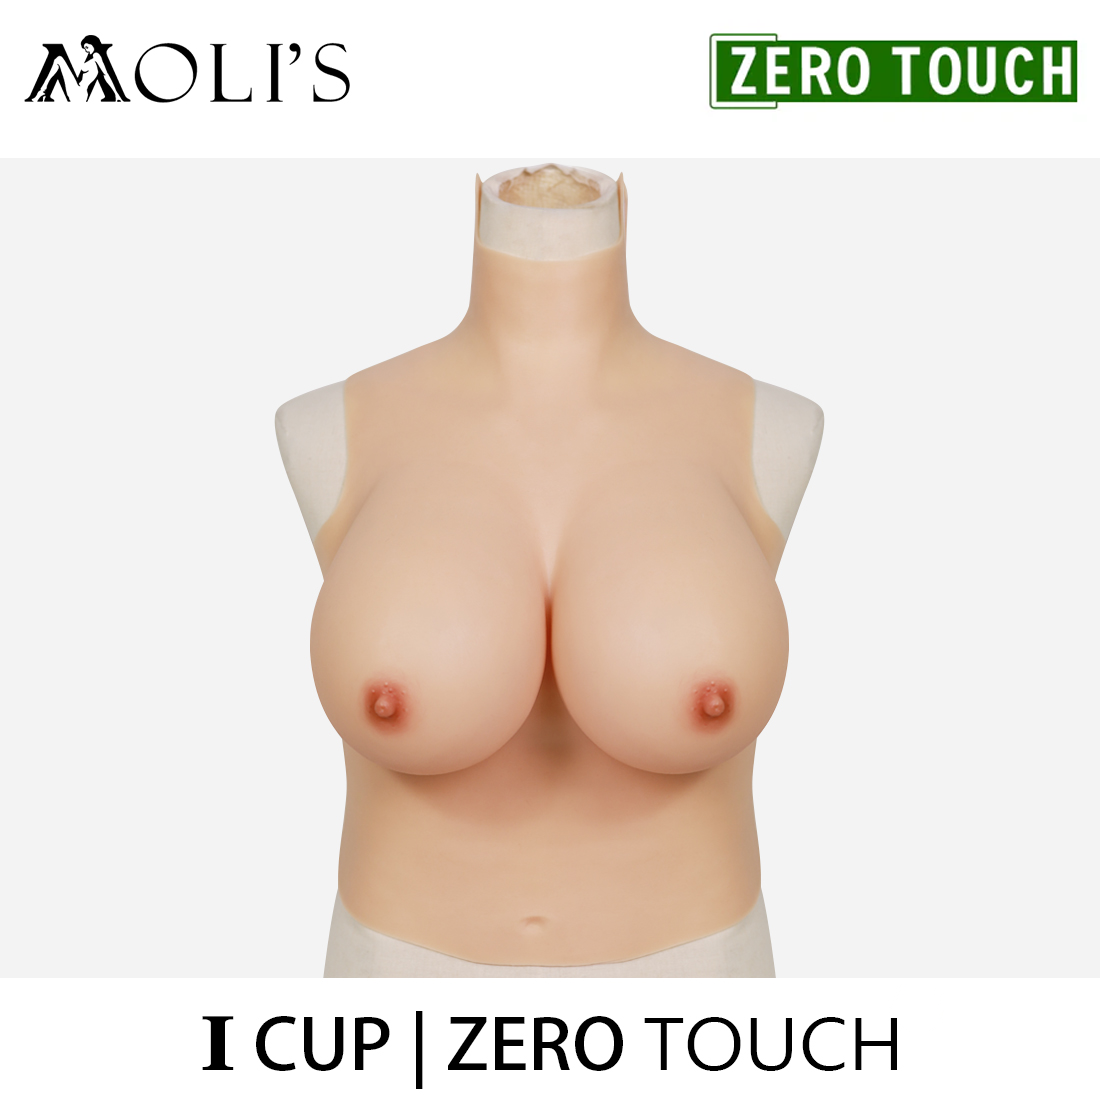 "Zero Touch" Breasts | "I" Cup Silicone Breastplate for Crossdressers - InTheMask by Moli's